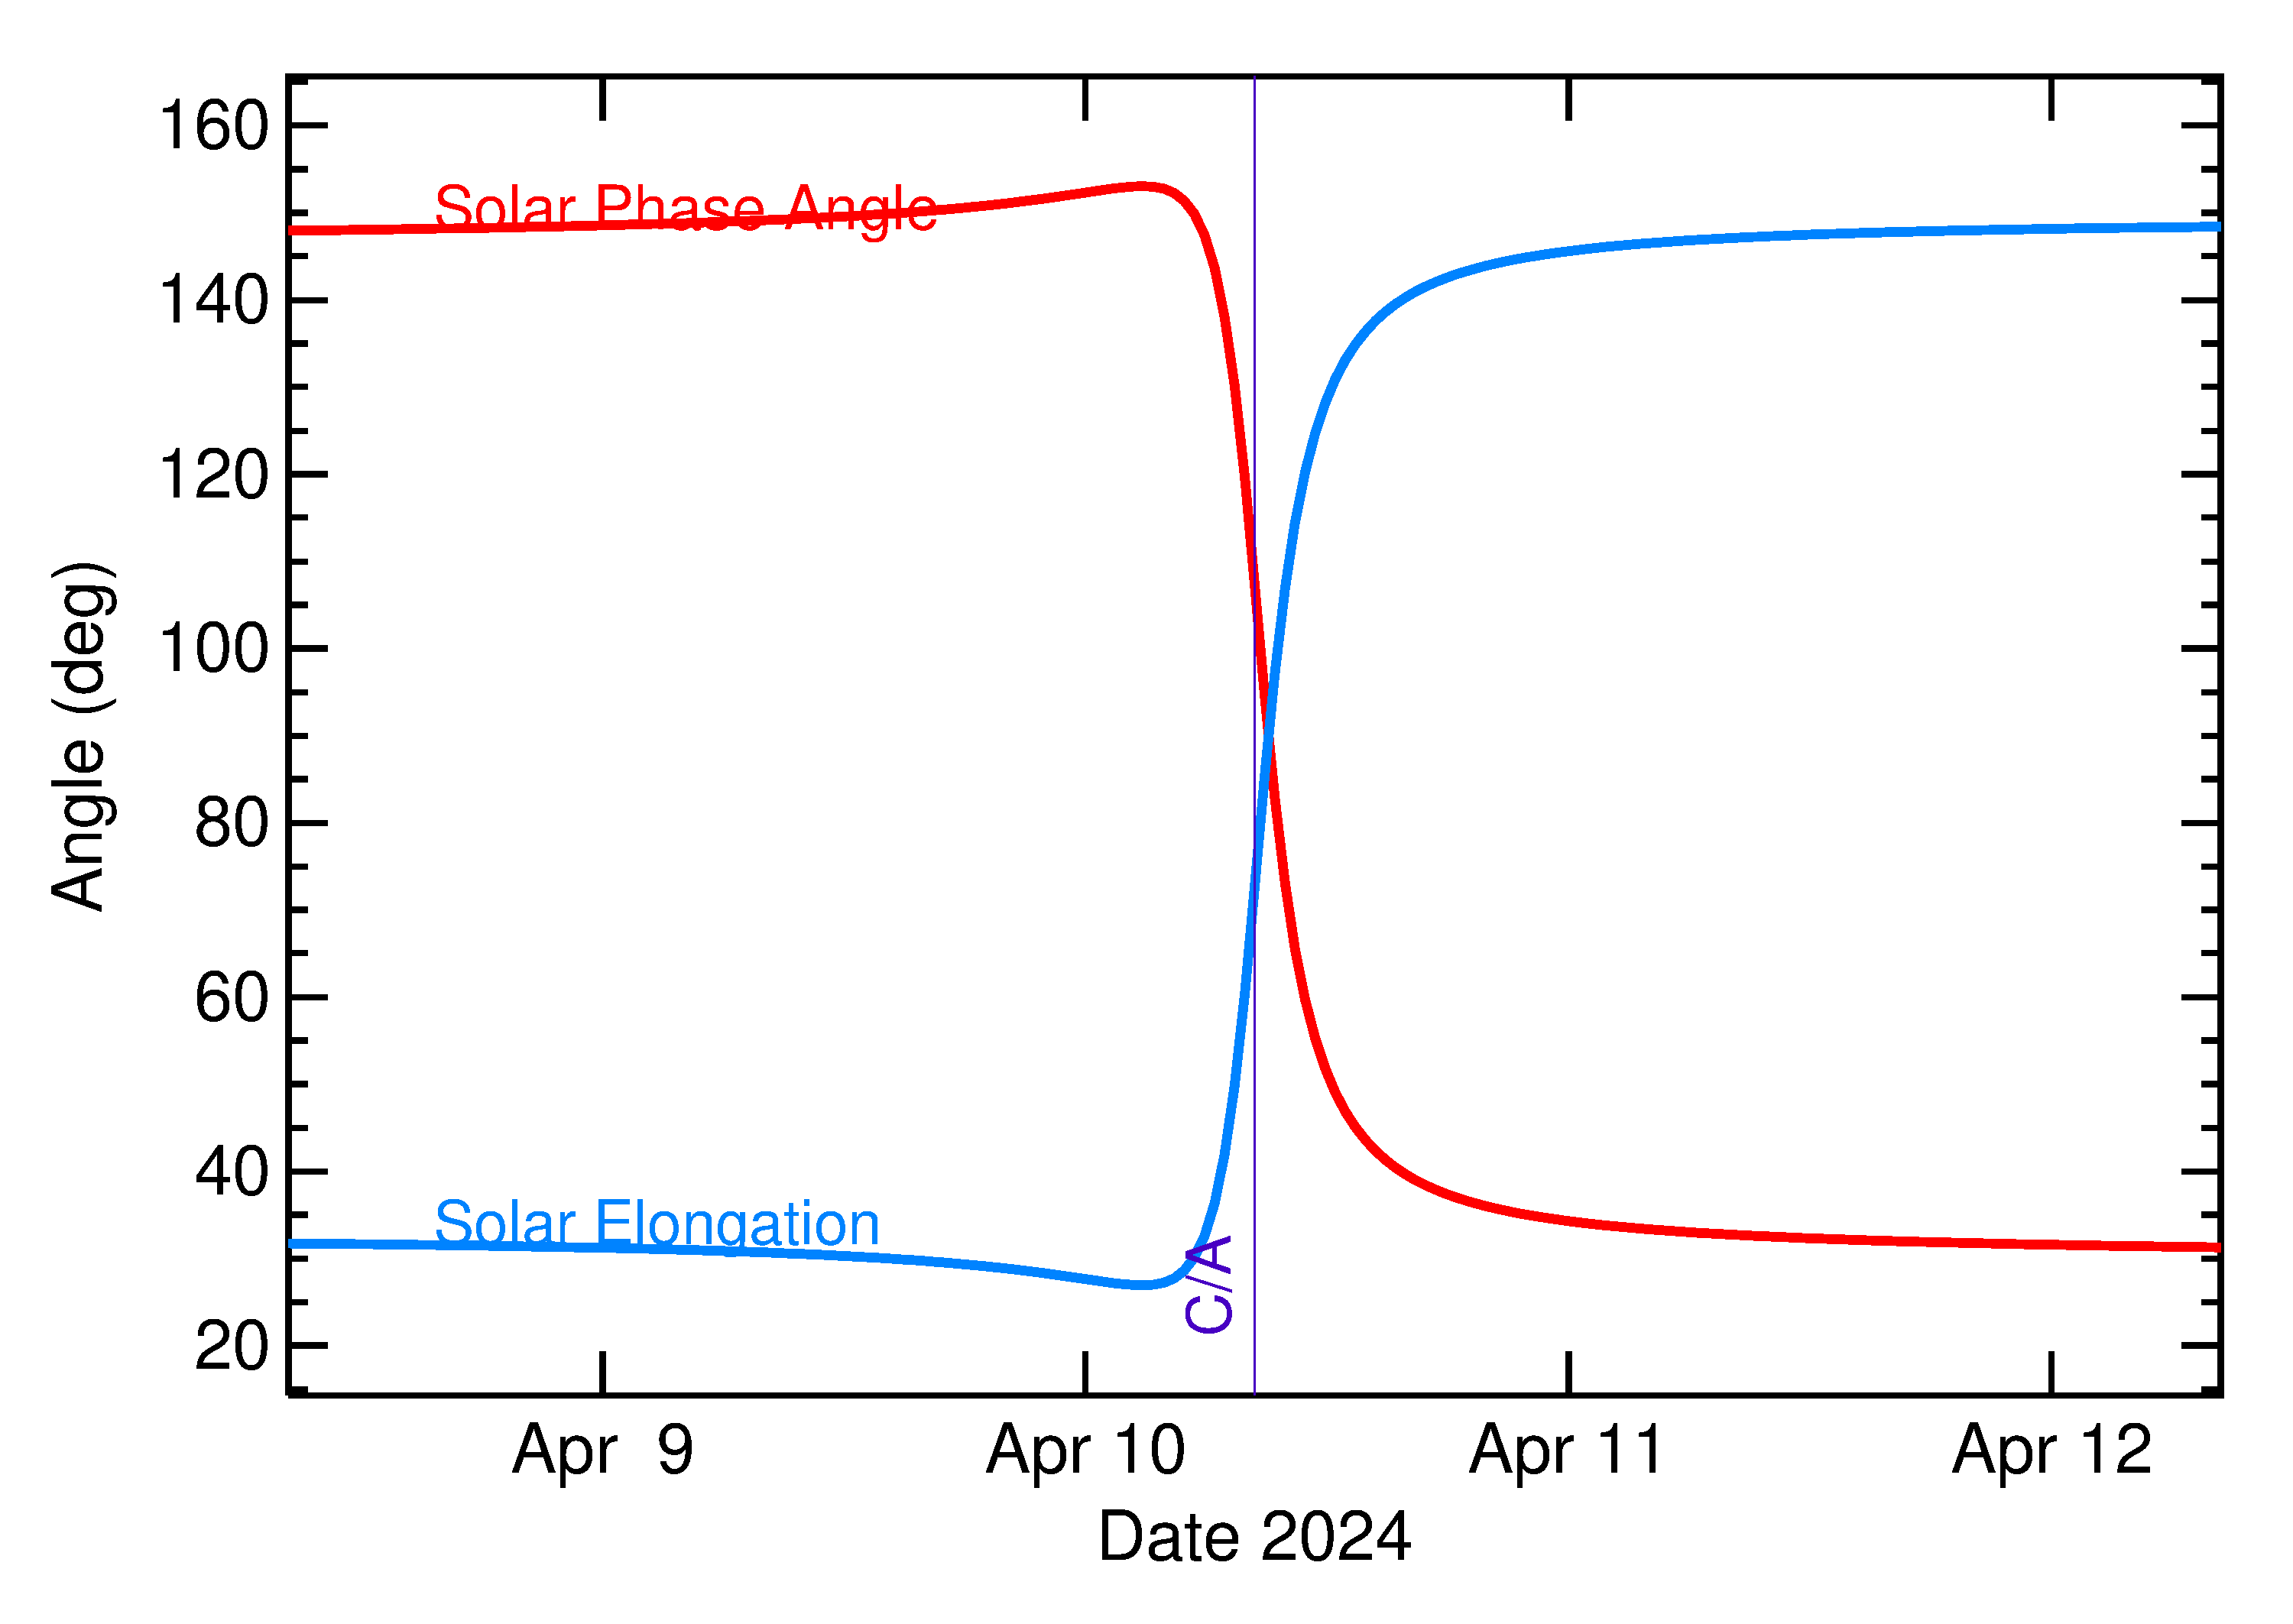 Solar Elongation and Solar Phase Angle of 2024 GX3 in the days around closest approach